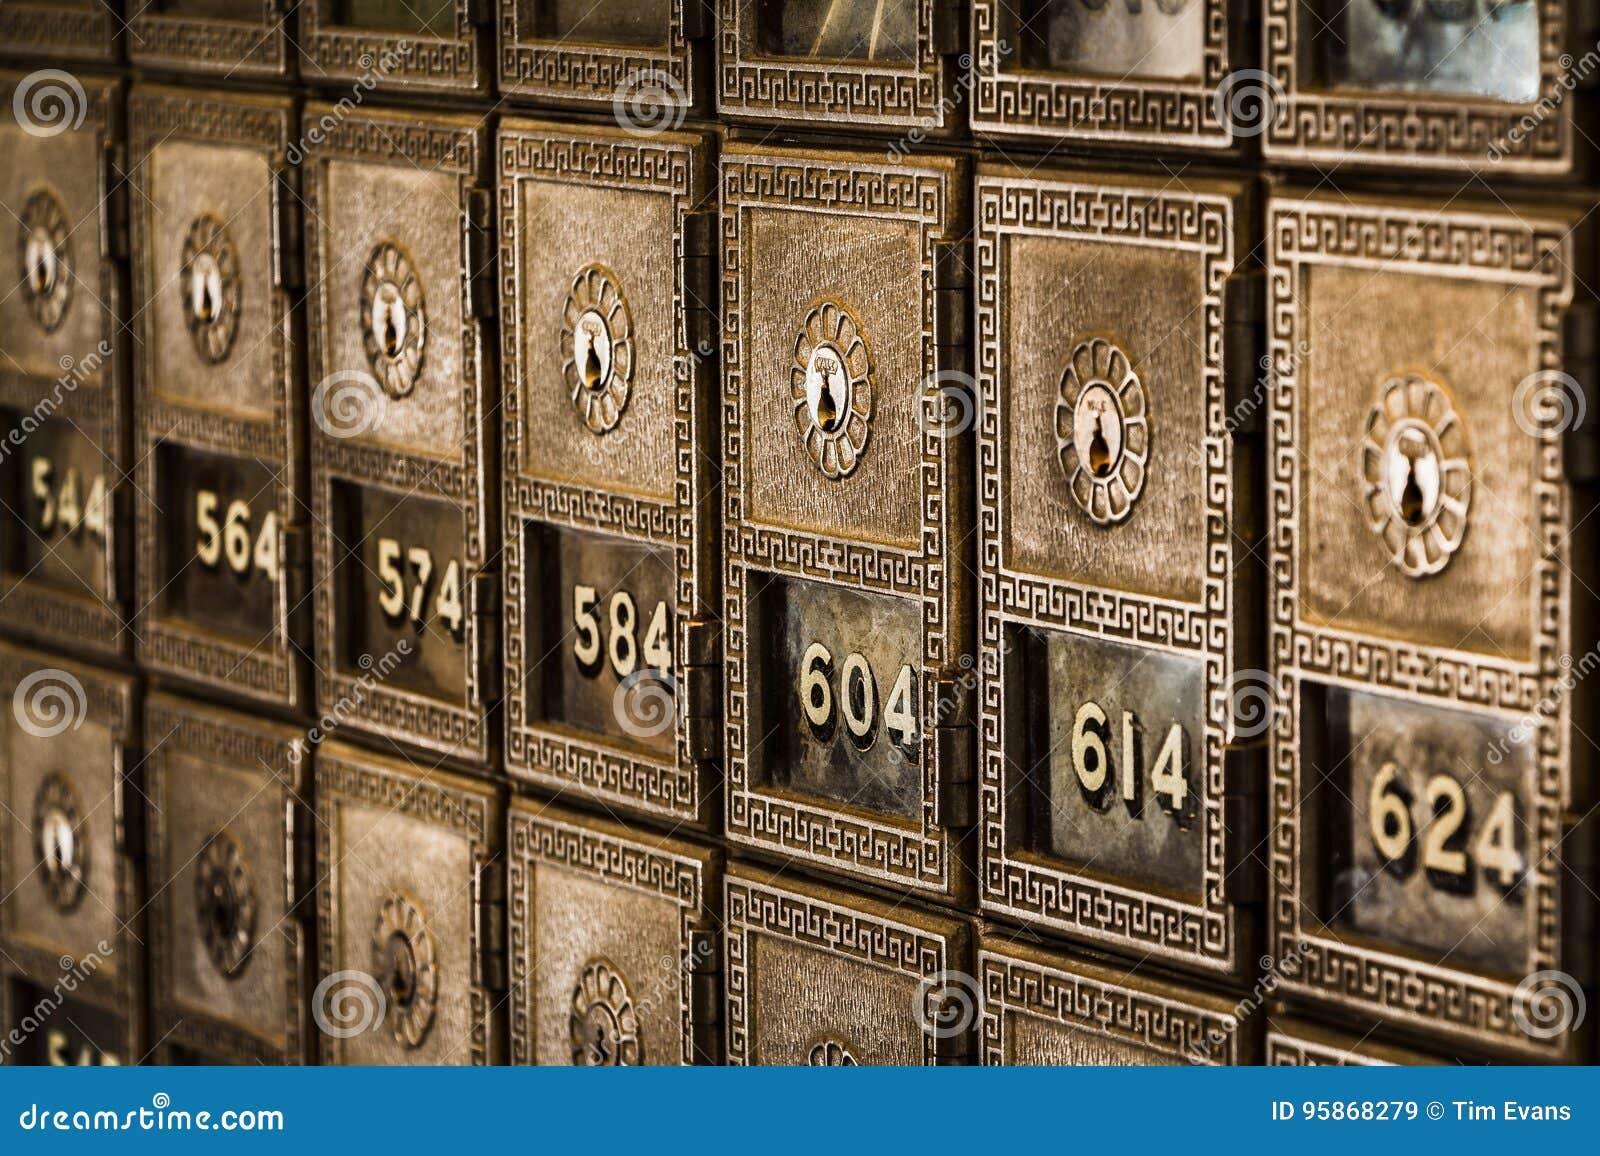 Rows of Old-Fashioned Post Office Boxes Stock Image - Image of doors, post:  95868279